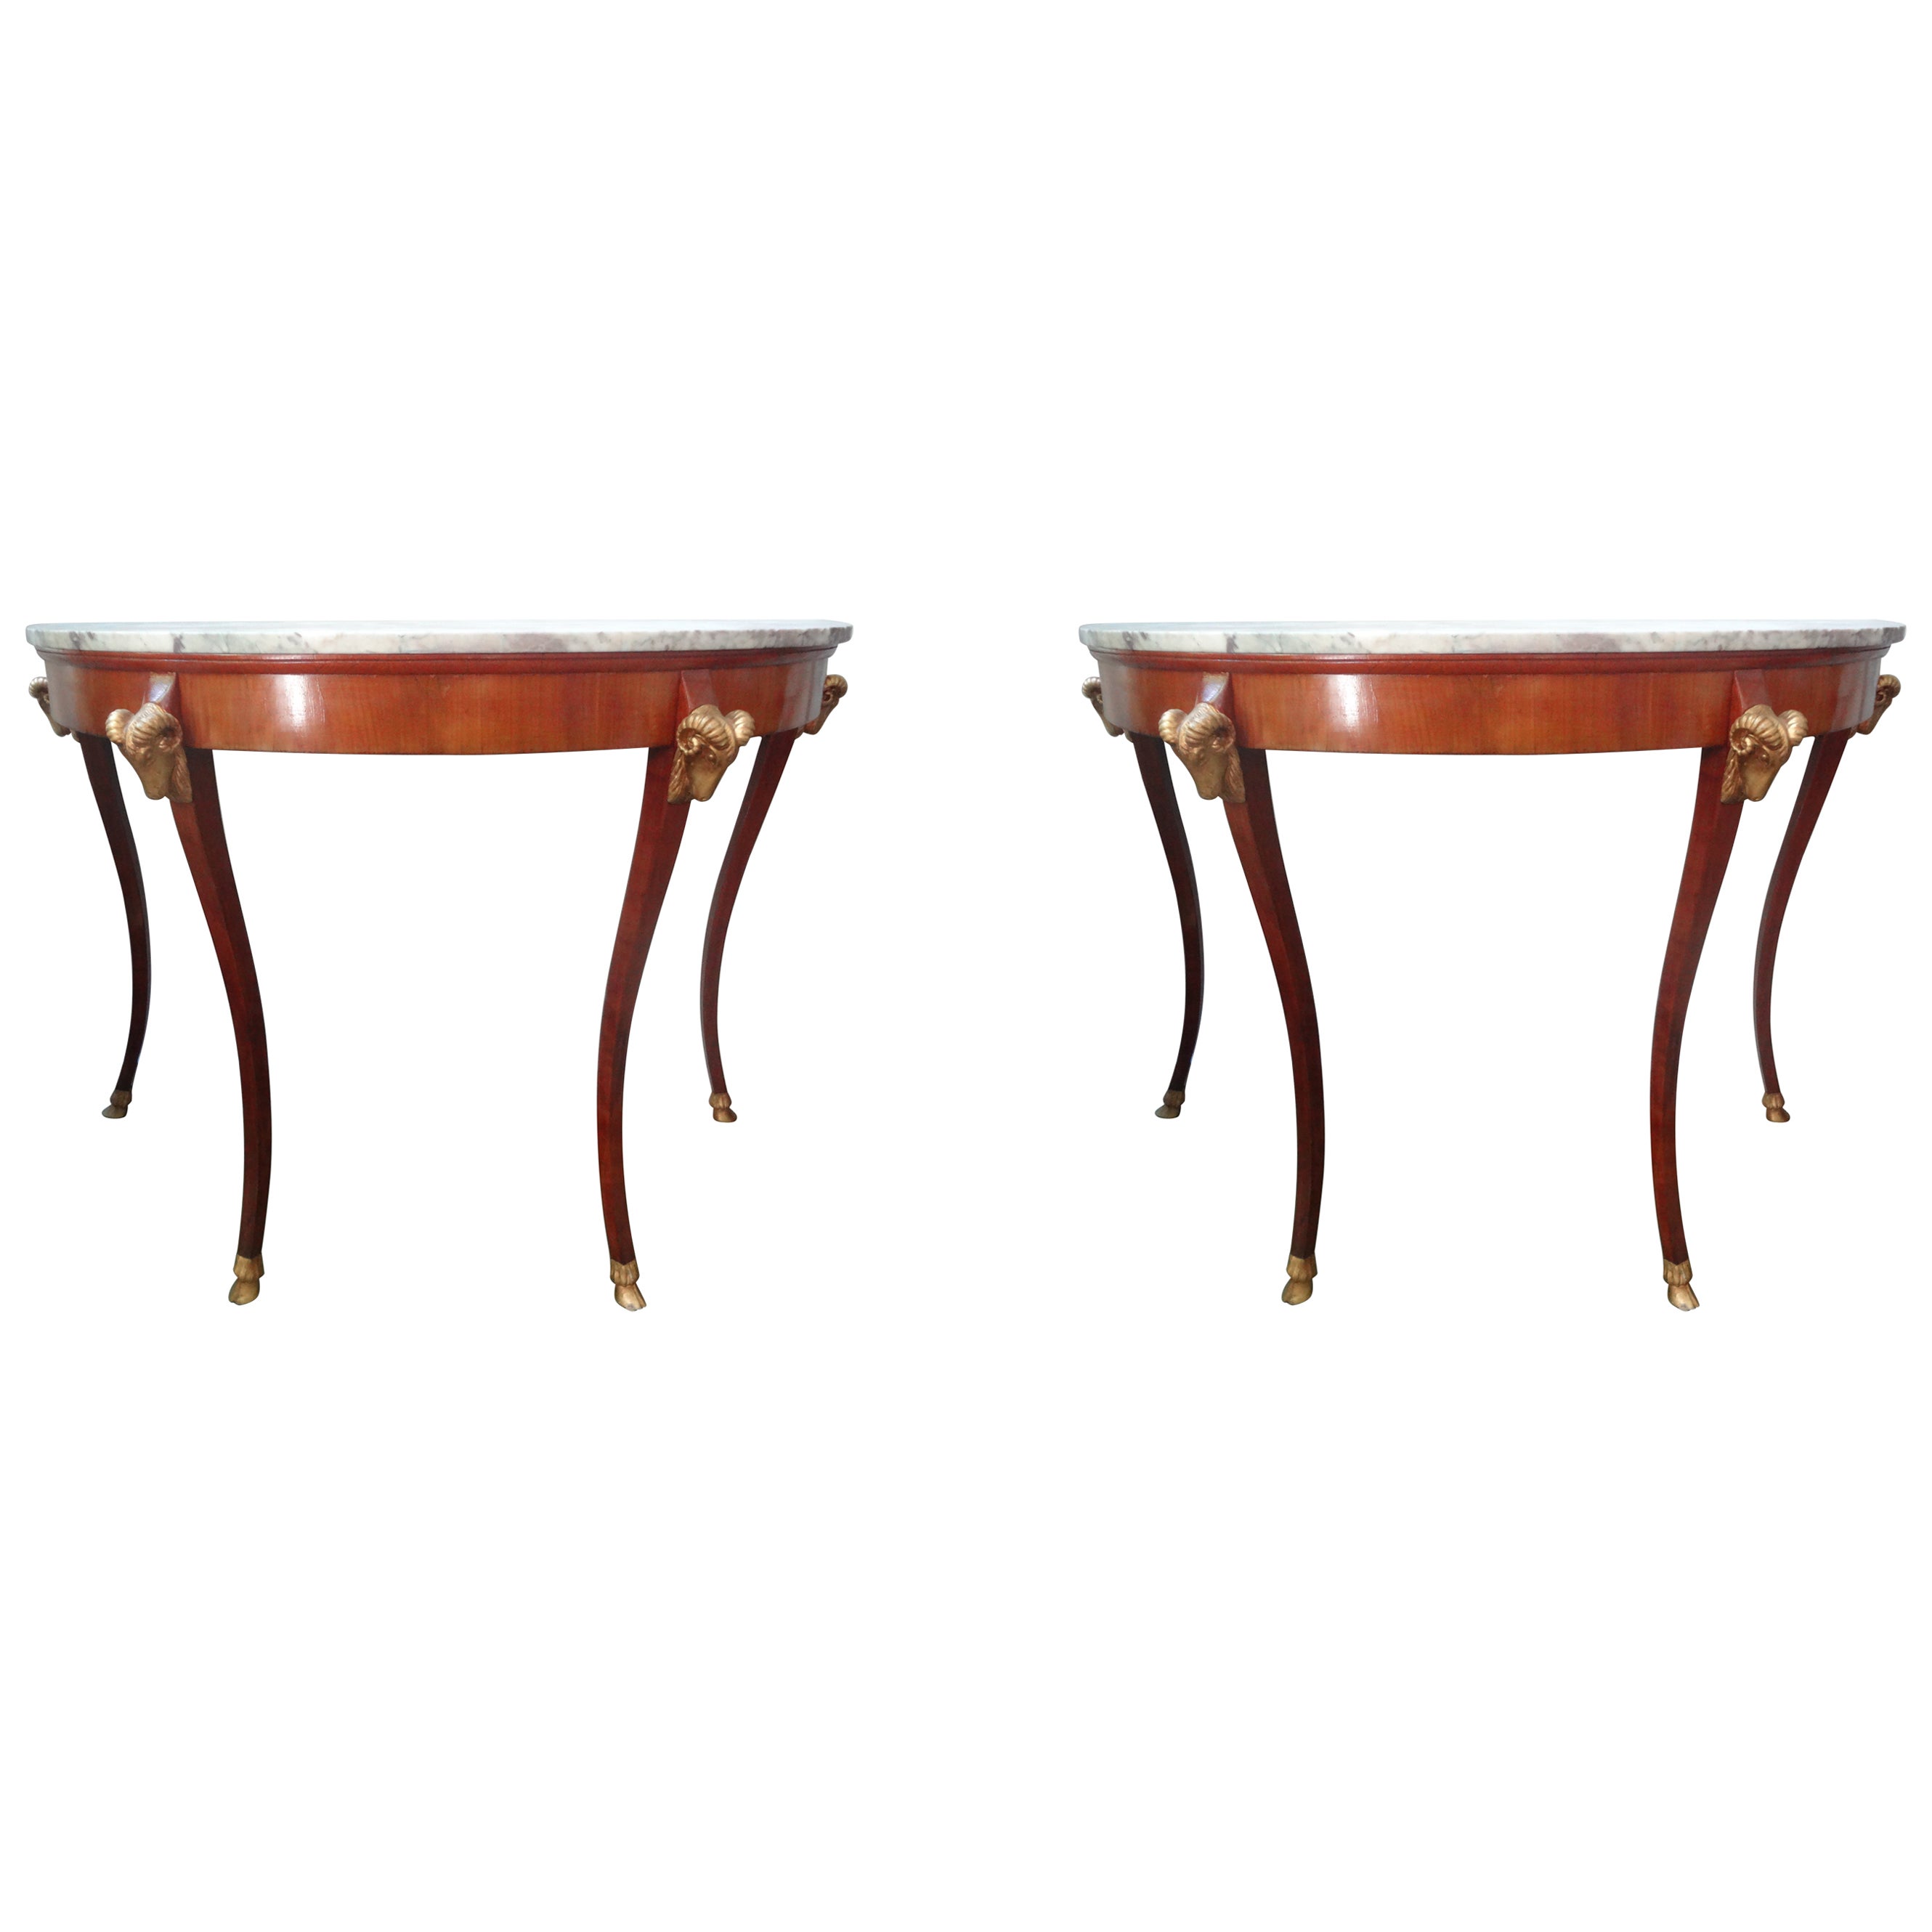 Pair of 19th Century Italian Neoclassical Style Console Tables For Sale